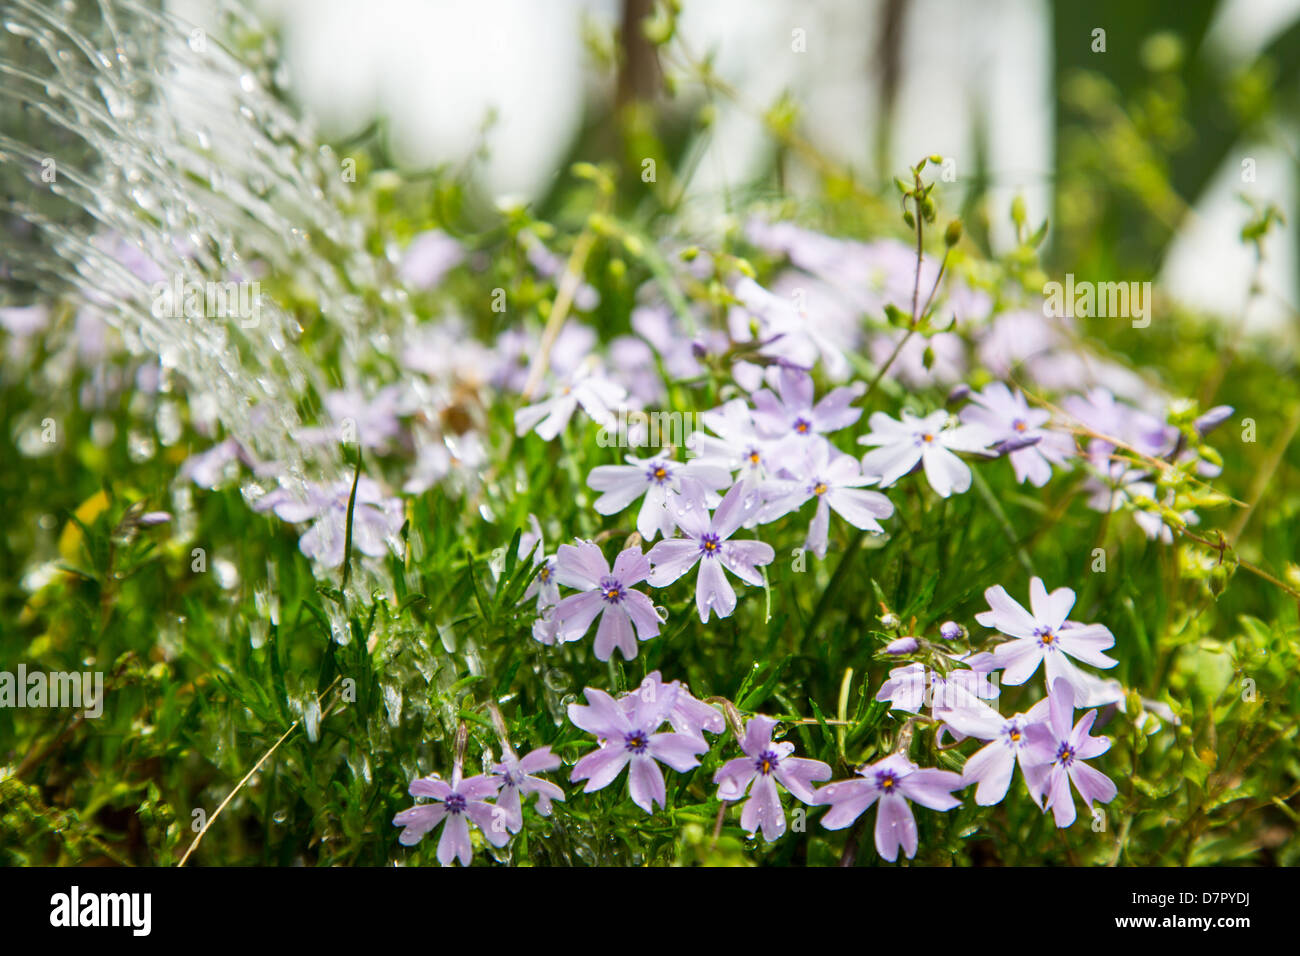 A watering can as it waters a patch of Phlox. Stock Photo